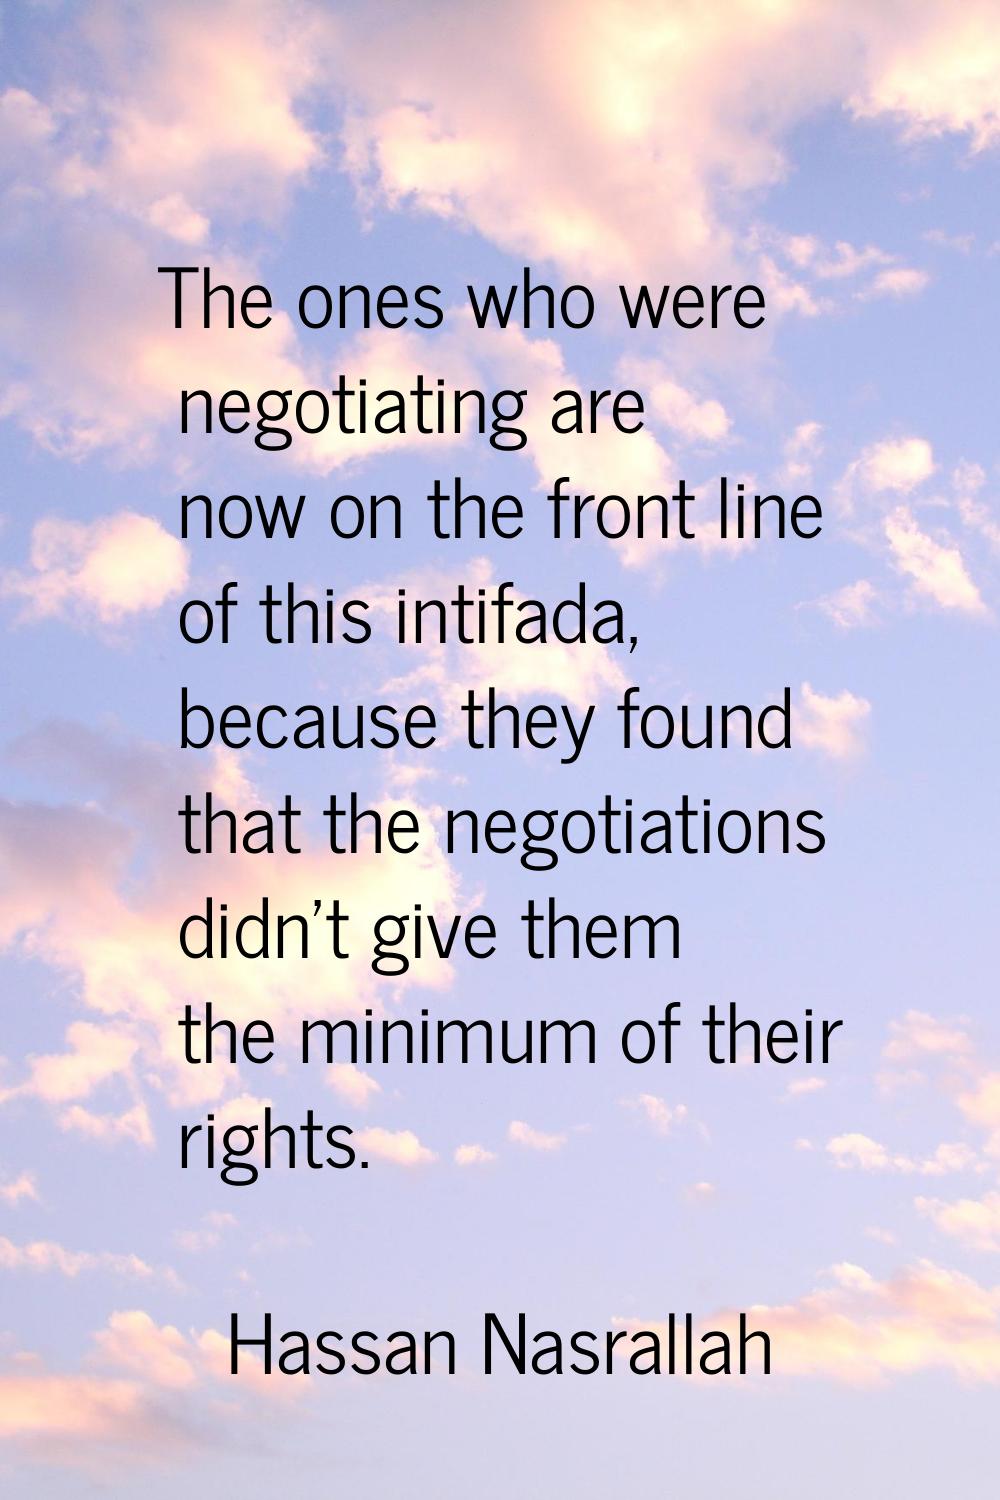 The ones who were negotiating are now on the front line of this intifada, because they found that t